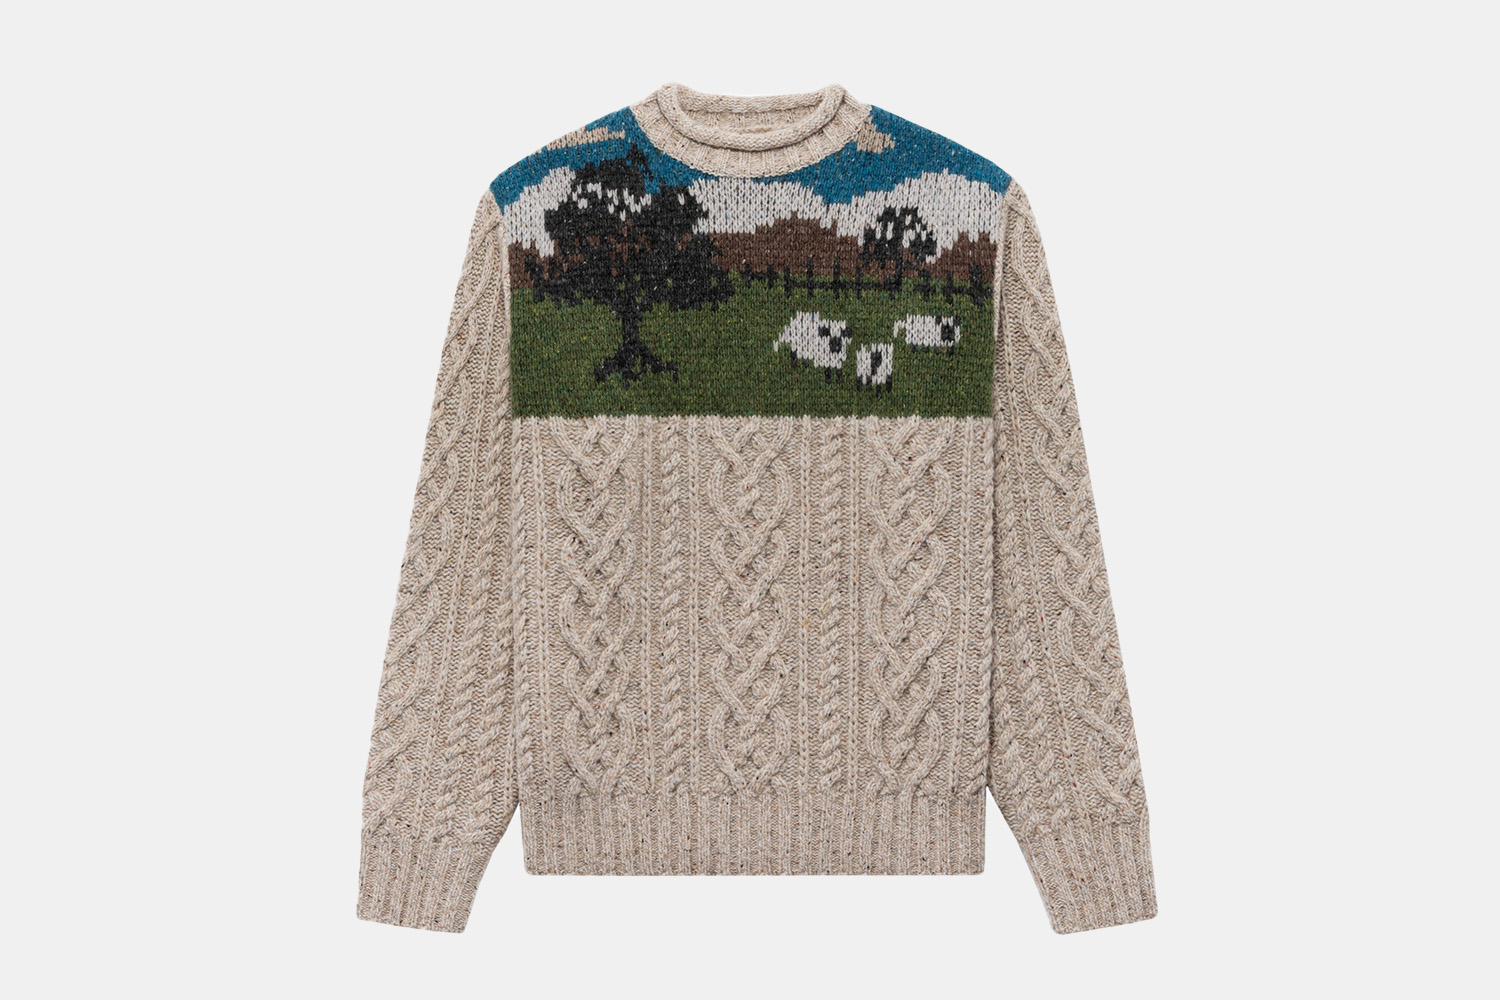 a knit sweater wit h a sheep graphic